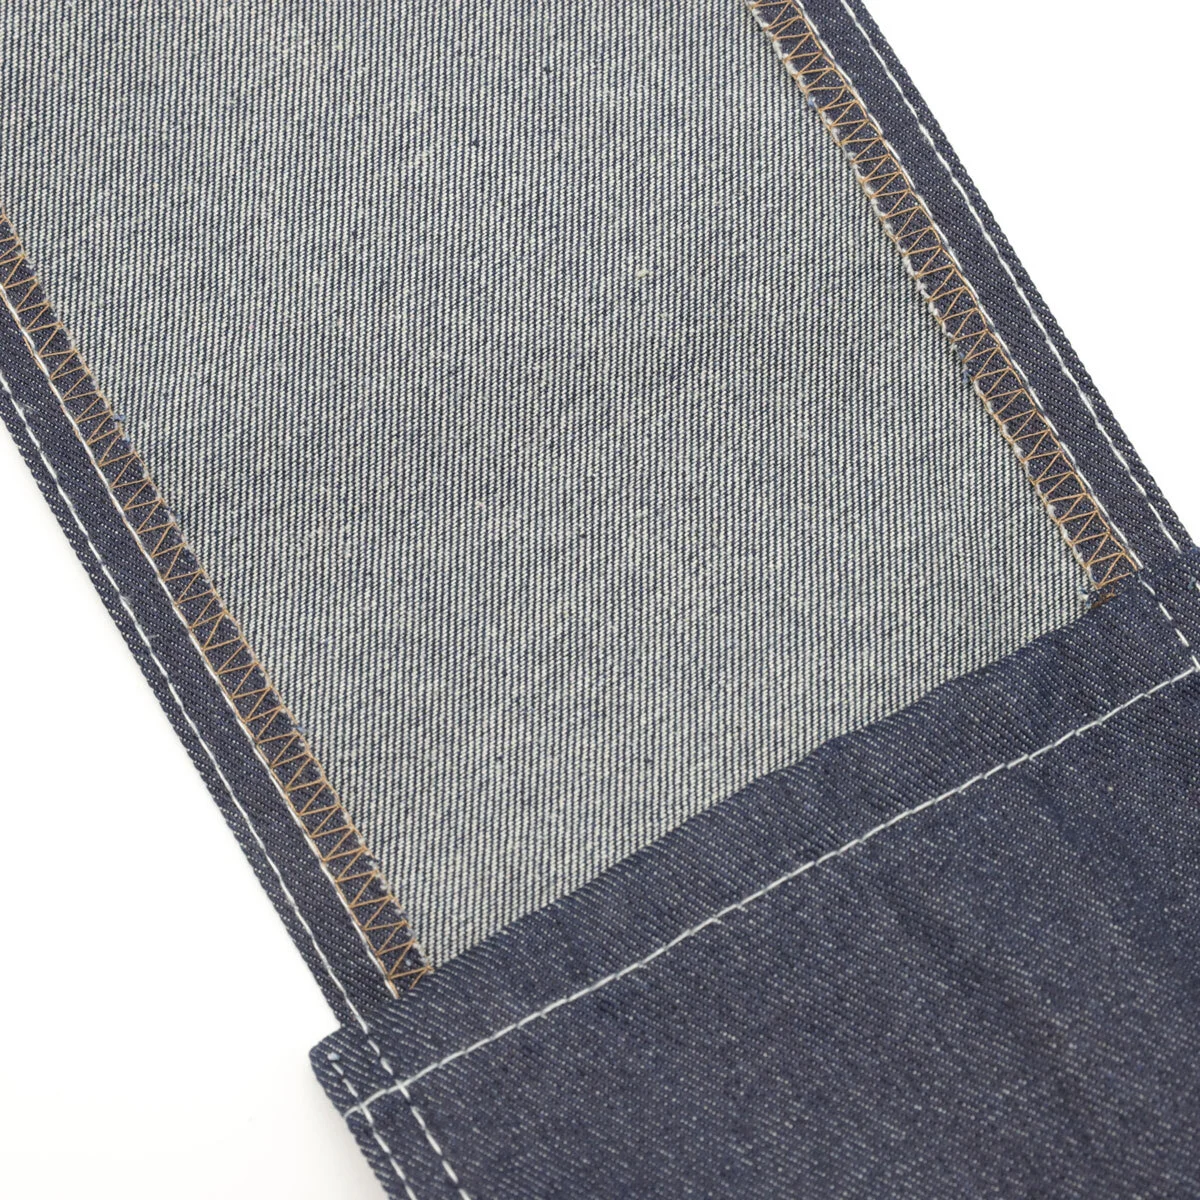 200A-9  75%cotton  14%polyester  11%viscose  Non stretch denim fabric with low price 6